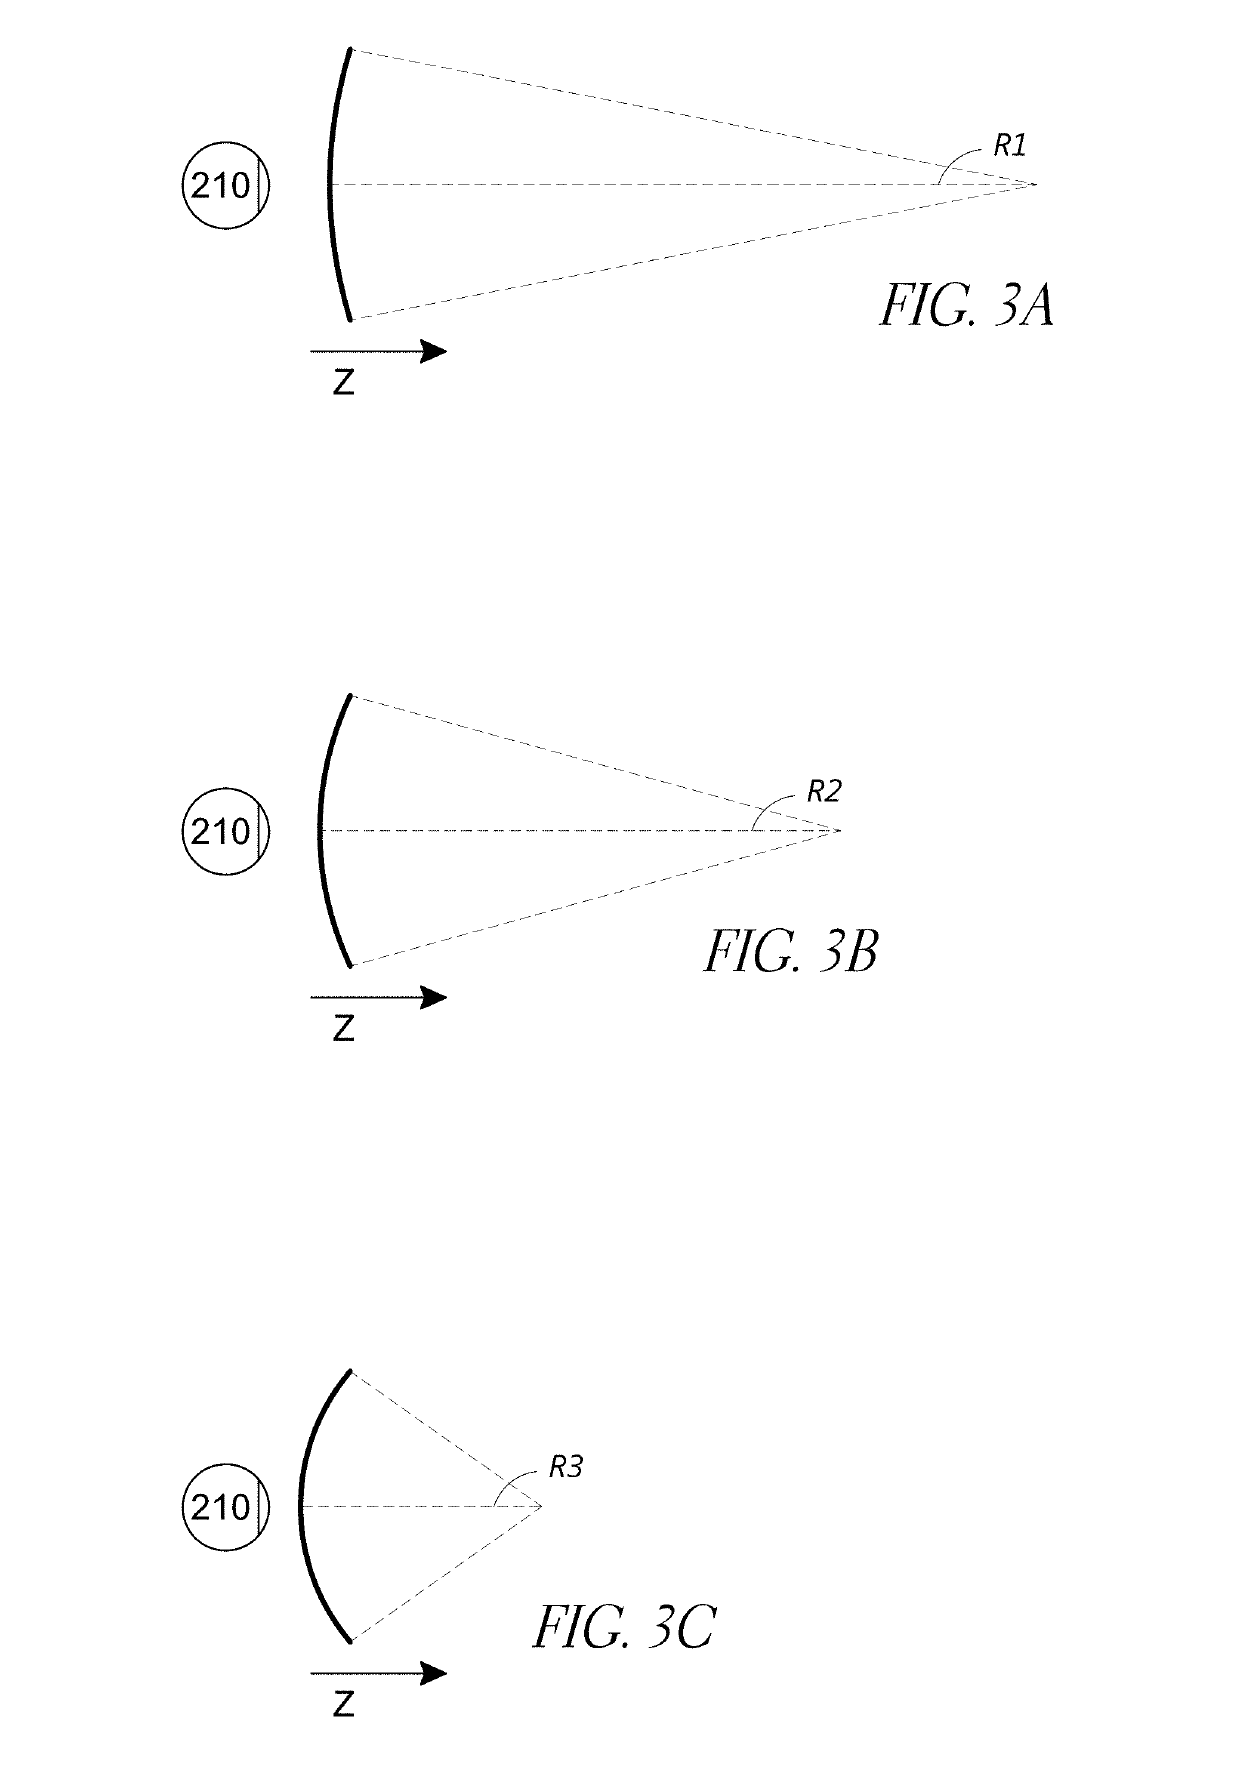 Display systems and methods for clipping content to increase viewing comfort